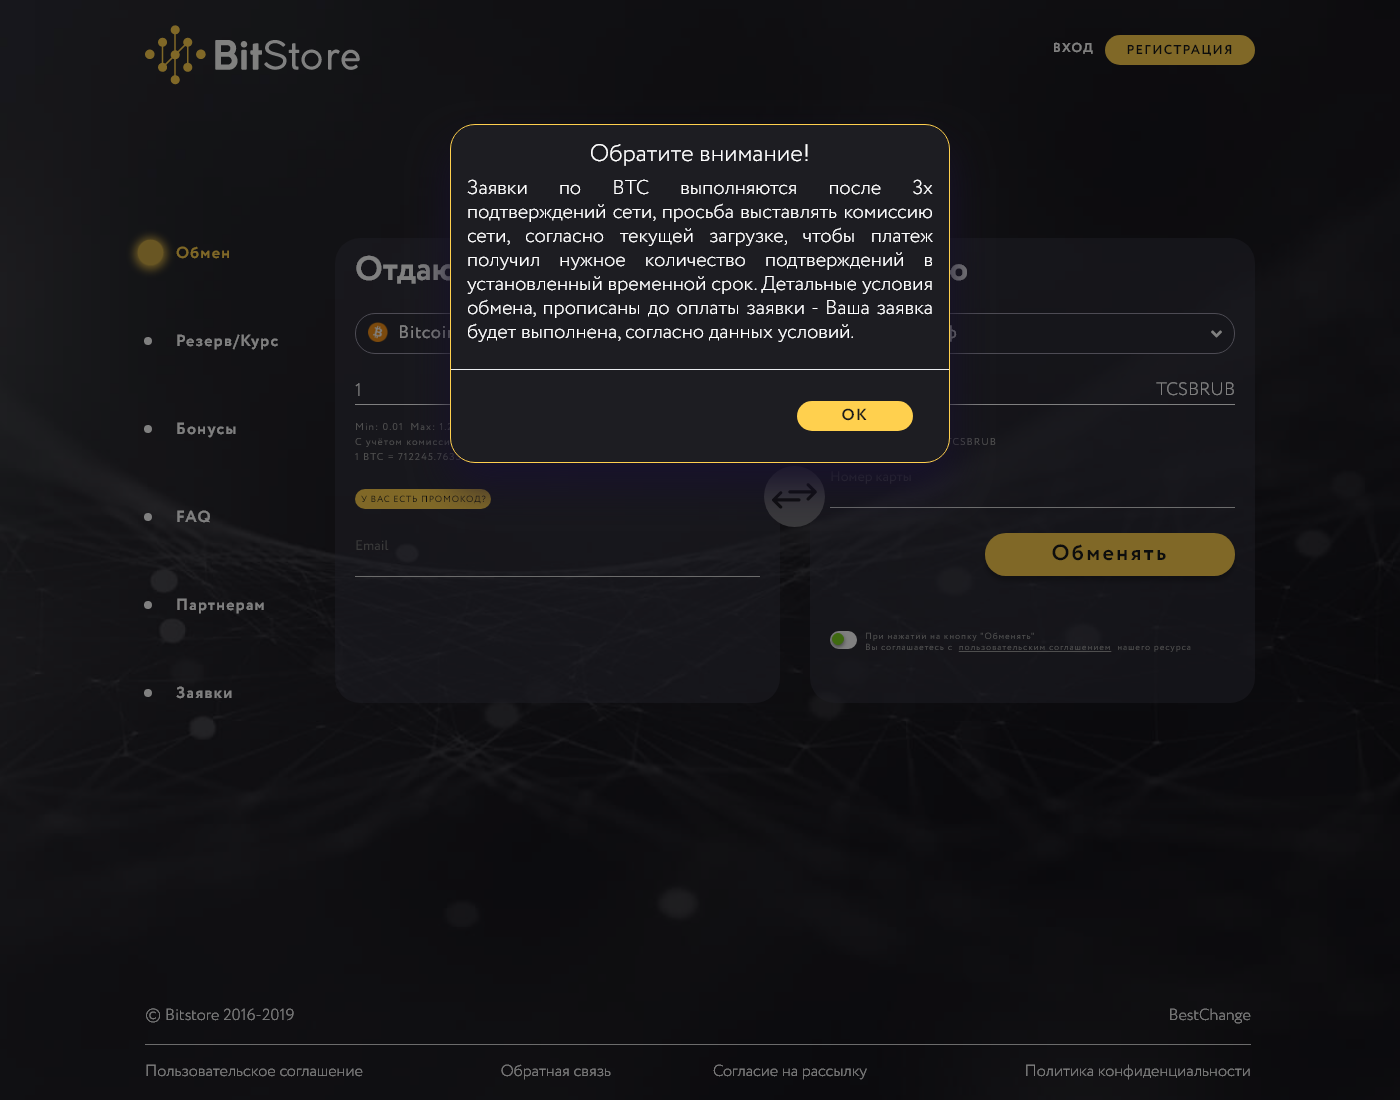 BitStore user interface: the home page in English